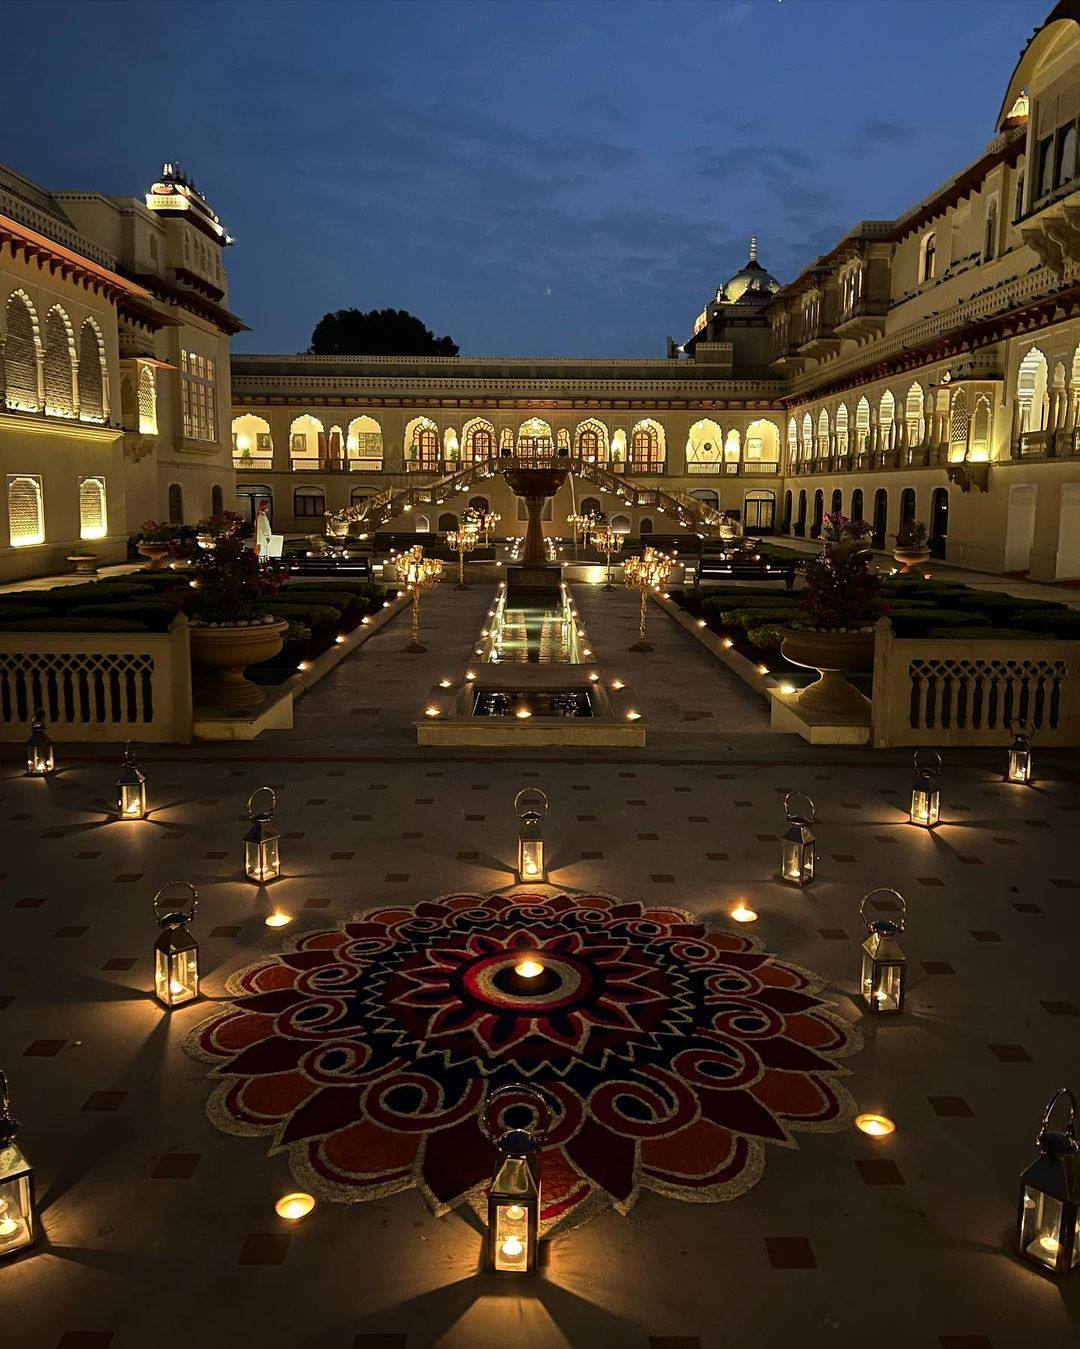 The Rambagh Palace in Jaipur, India. Photo: Instagram